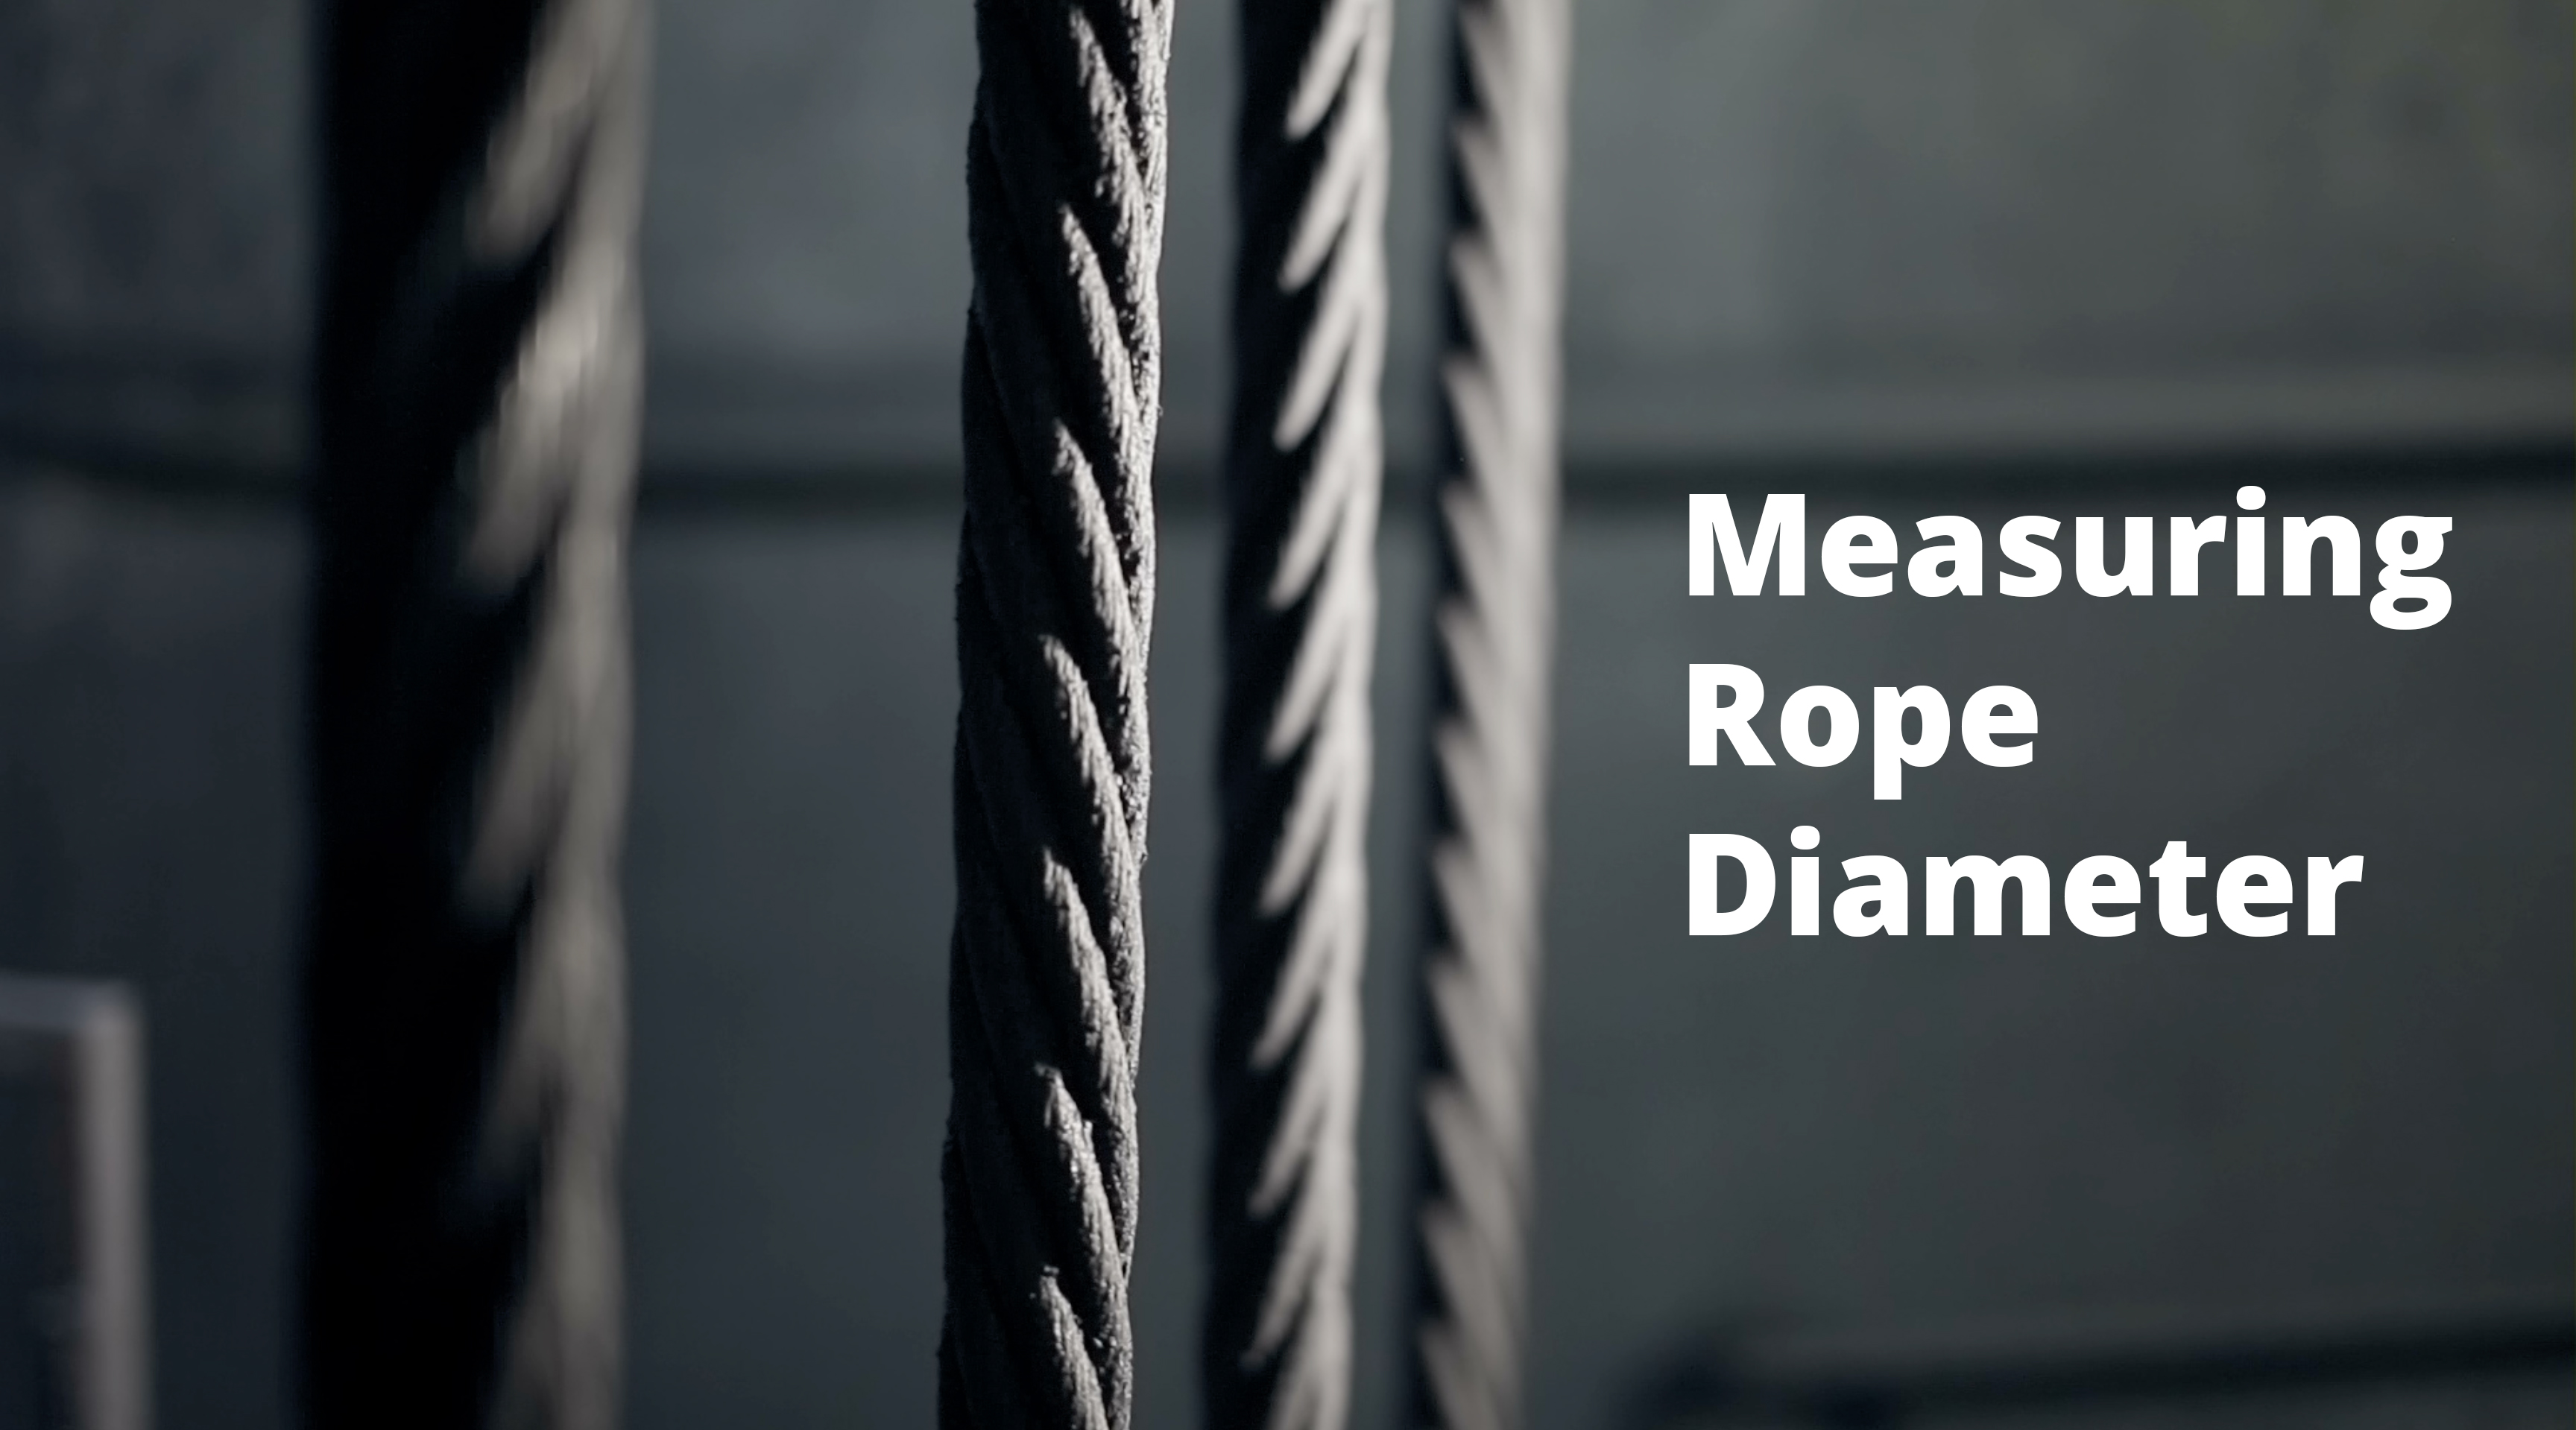 Thumbnail image for the podcast "Measuring rope diameter" featuring an image of steel wire rope & text containing the podcast title.